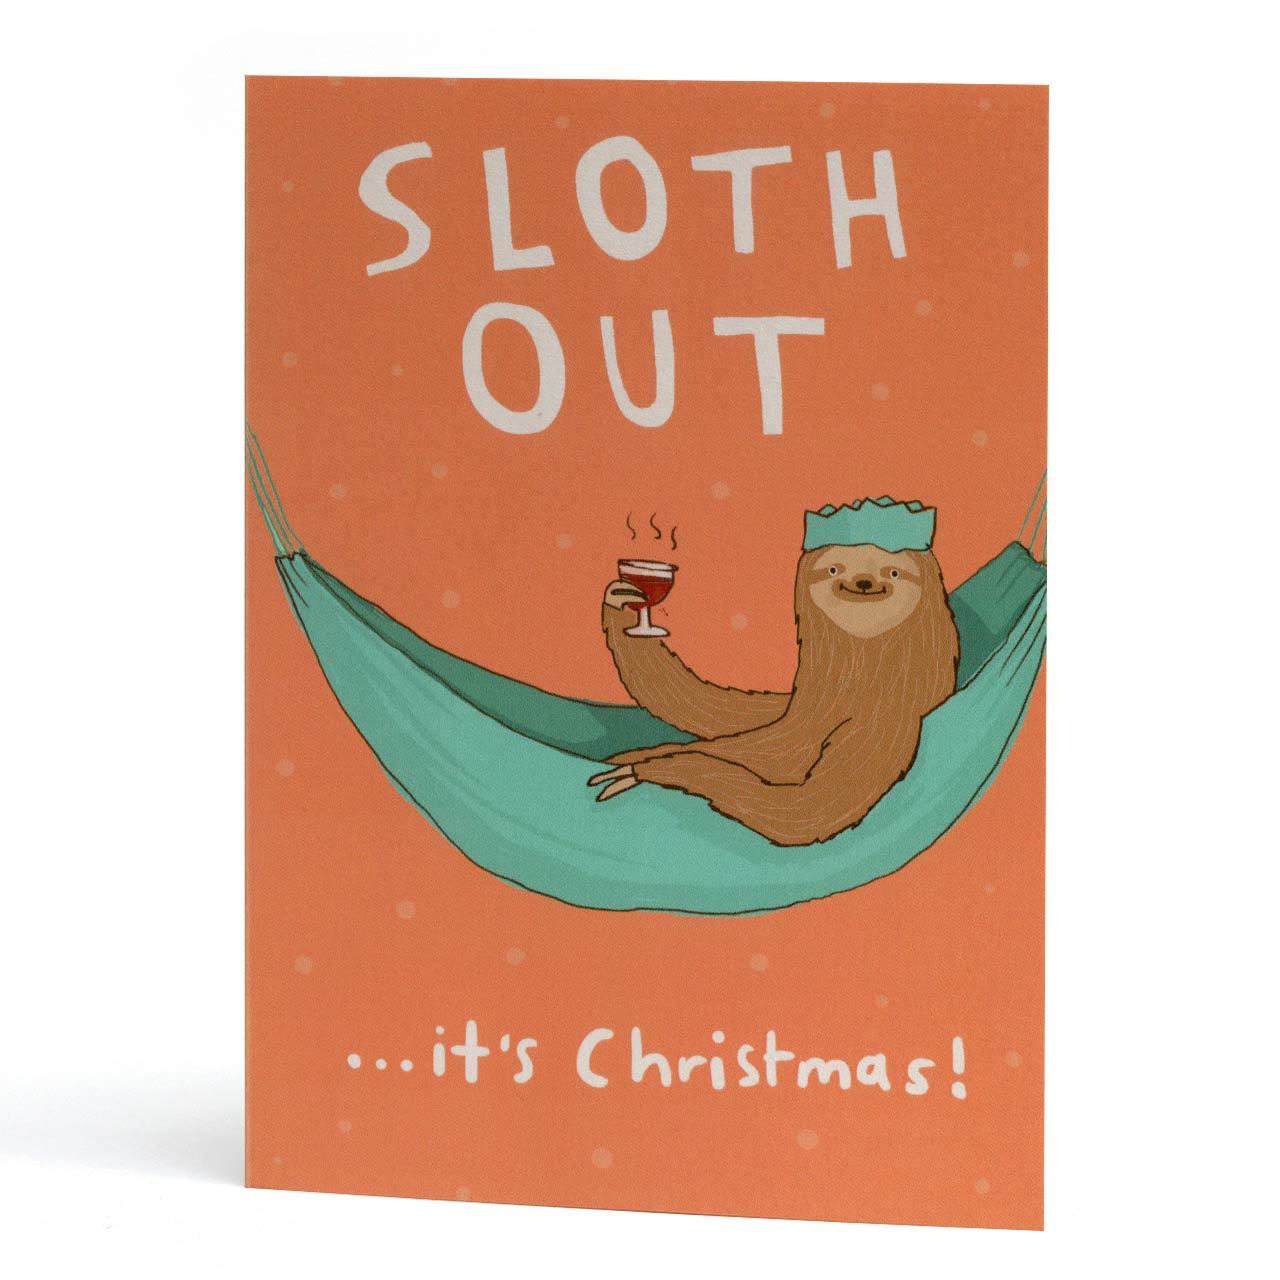 Sloth Out it's Christmas Greeting Card